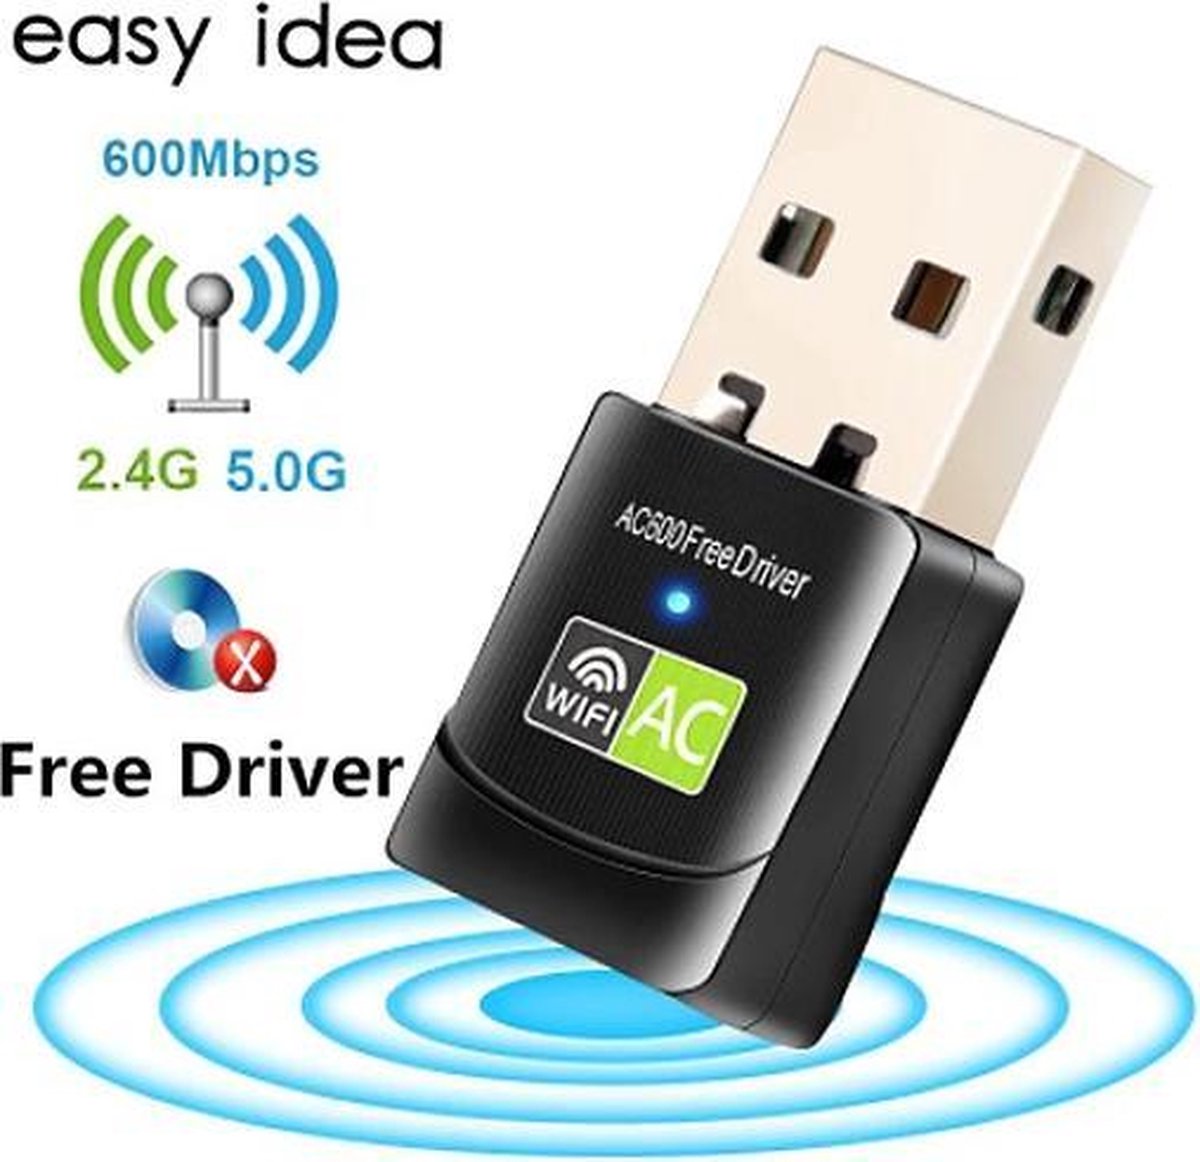 Prime - Driver Free - 600Mbps - Dual Band - USB WiFi - Plug en Play WiFi Adapter - Zonder Installatie